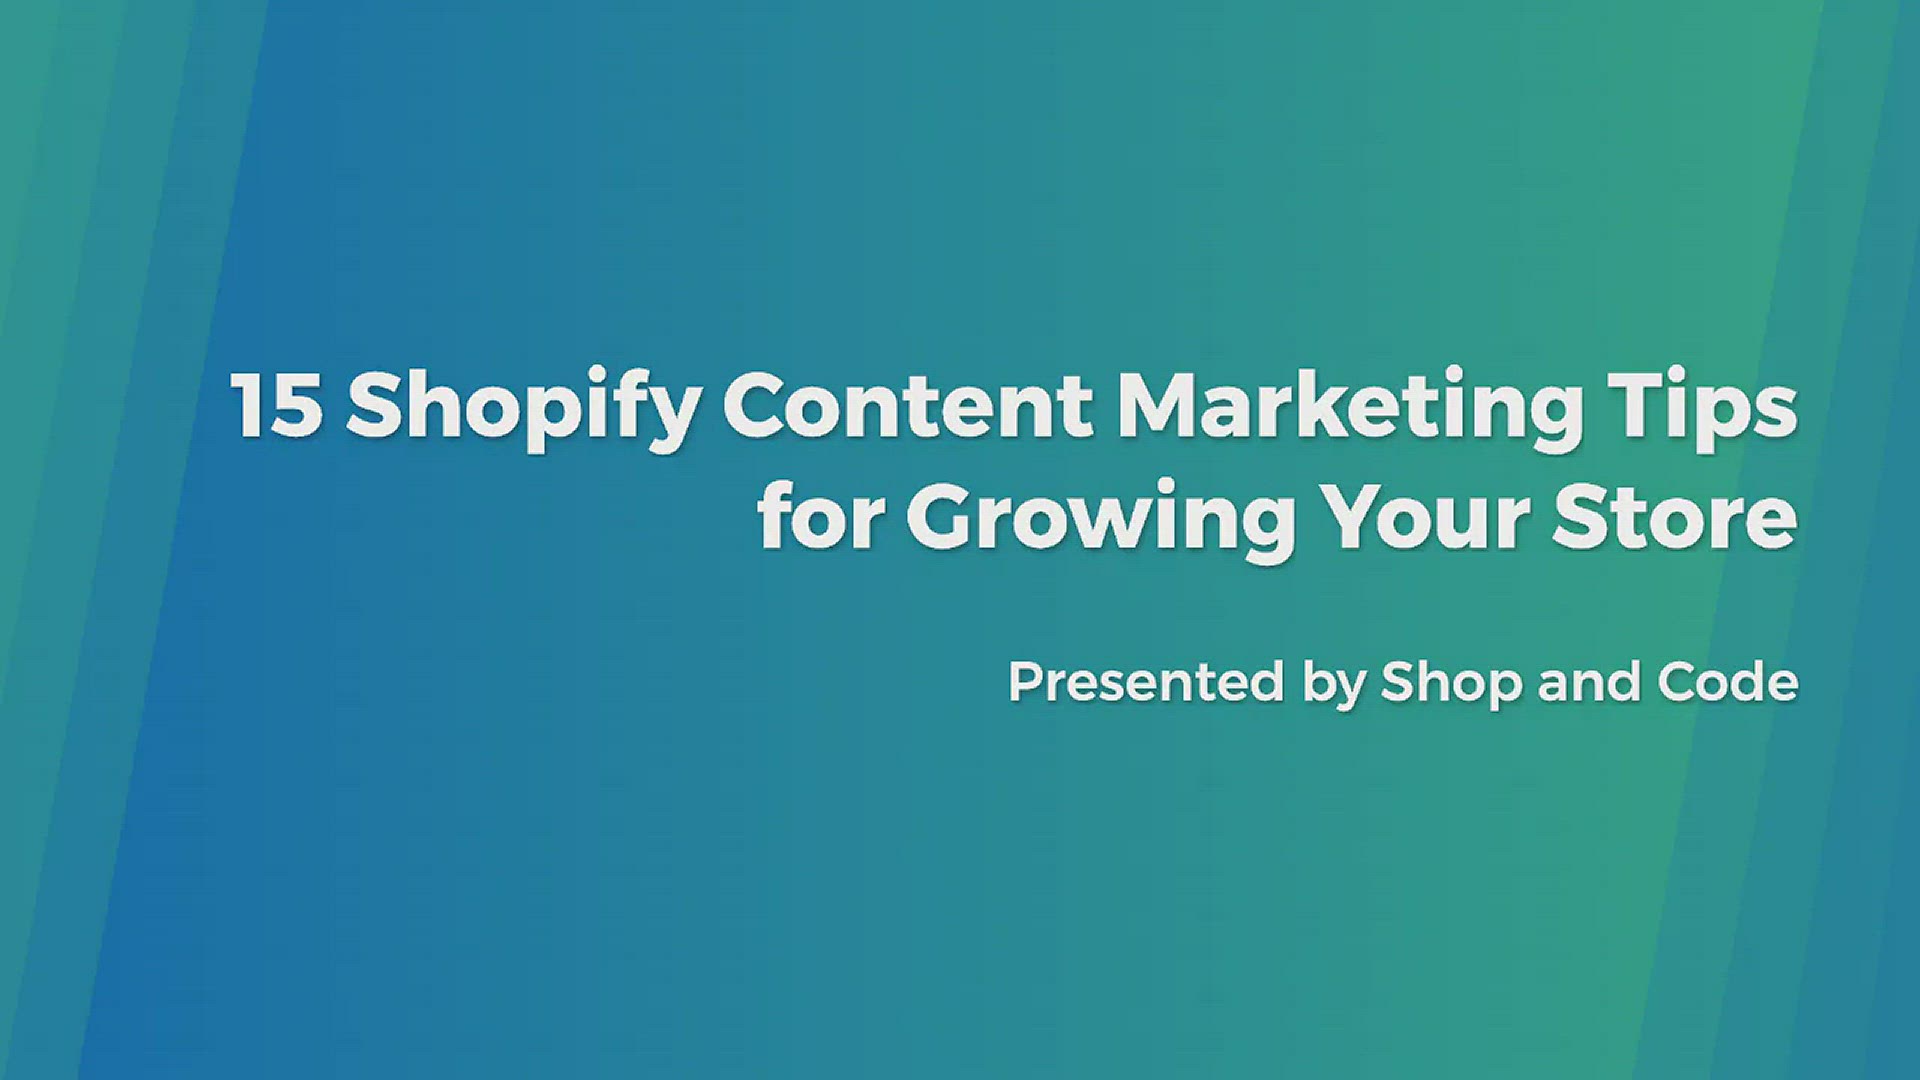 'Video thumbnail for 15 Shopify Content Marketing Tips for Growing Your Store'